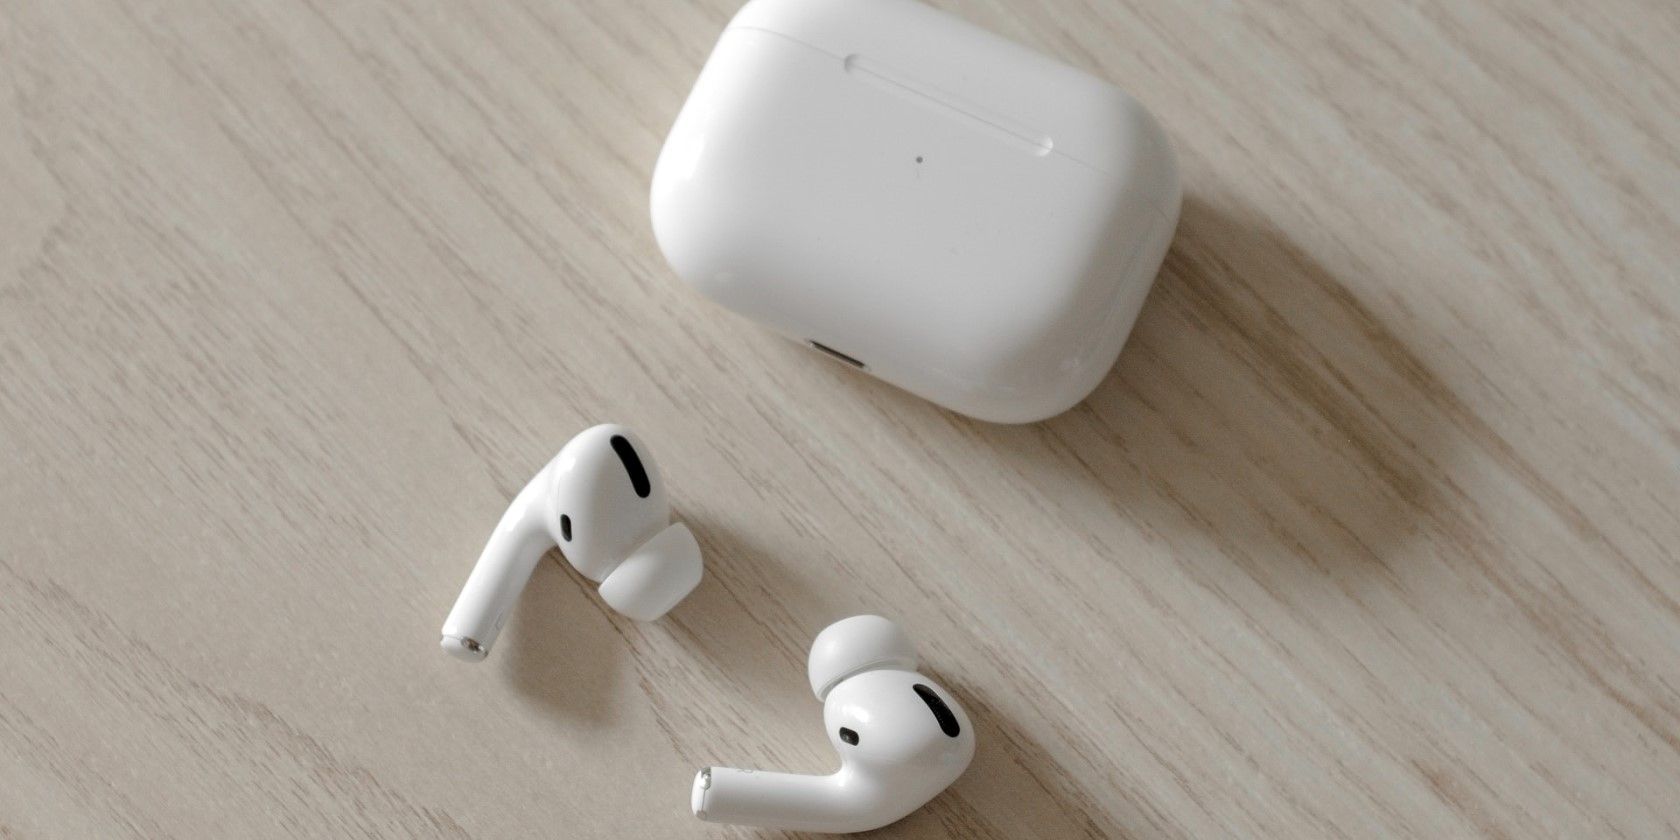 Get Apple AirPods Pro for Only $169 on Black Friday